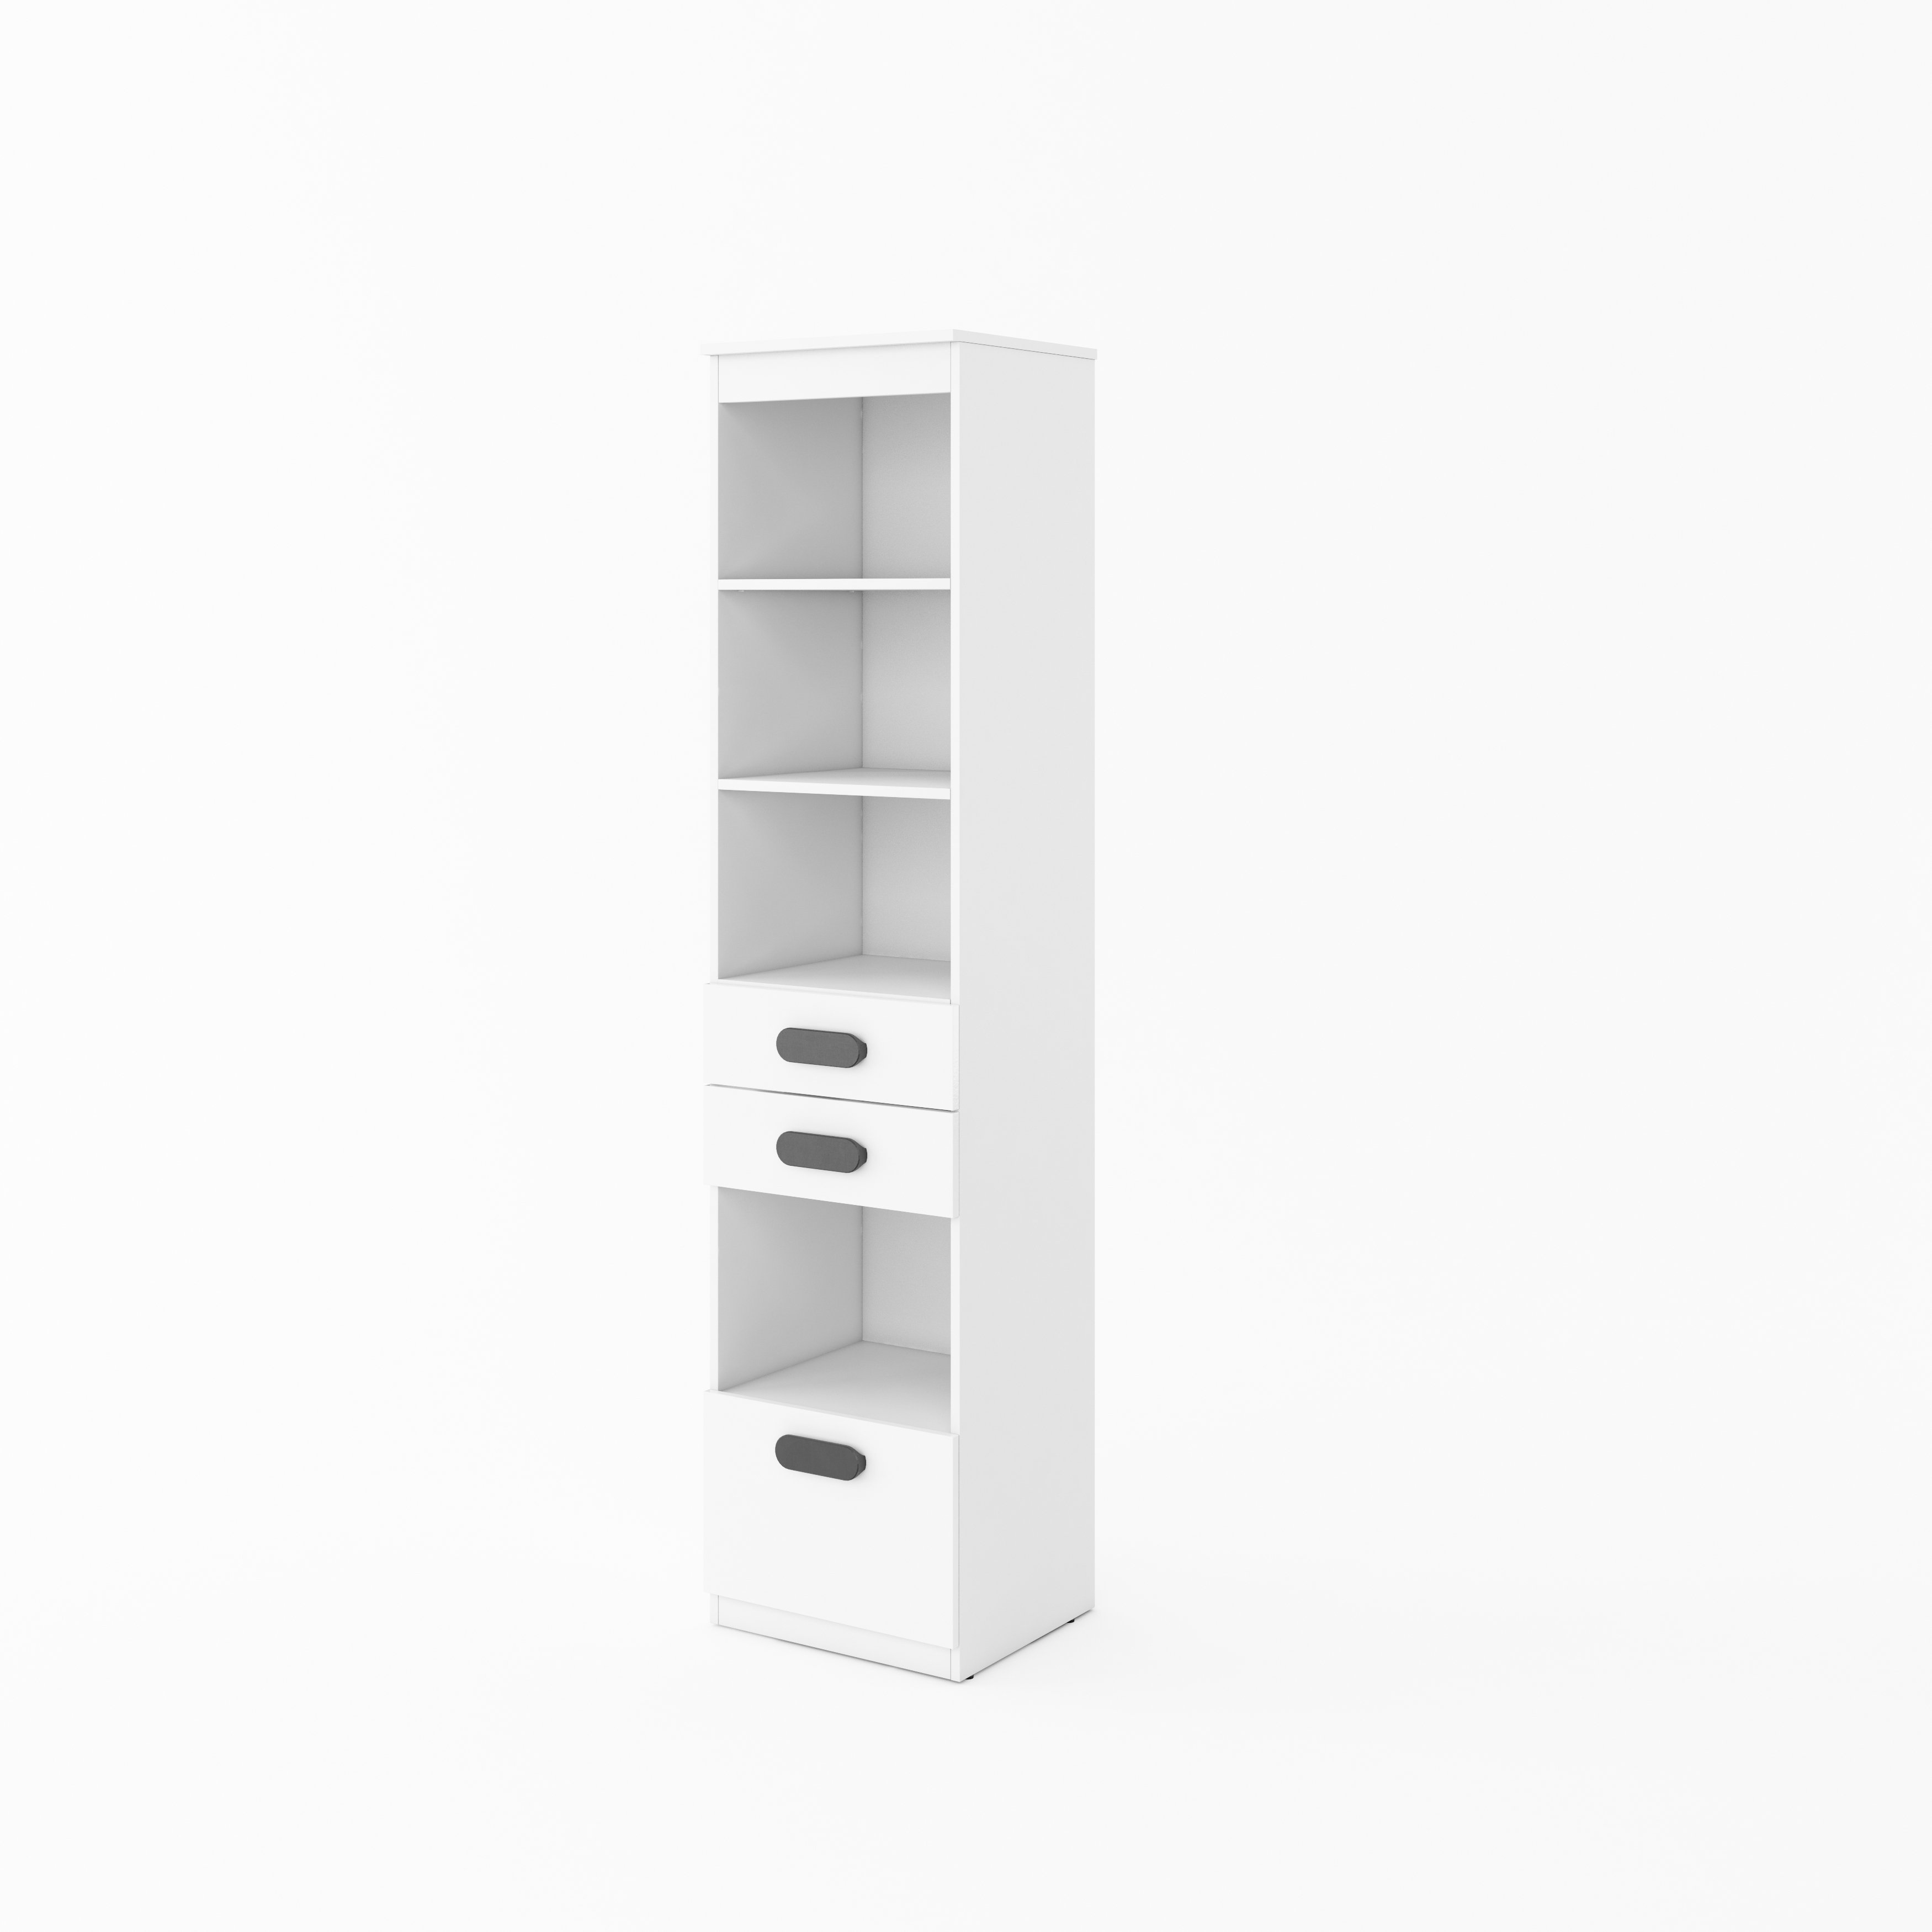 Replay RP-05 Tall Display Cabinet - White Gloss 45cm GREY